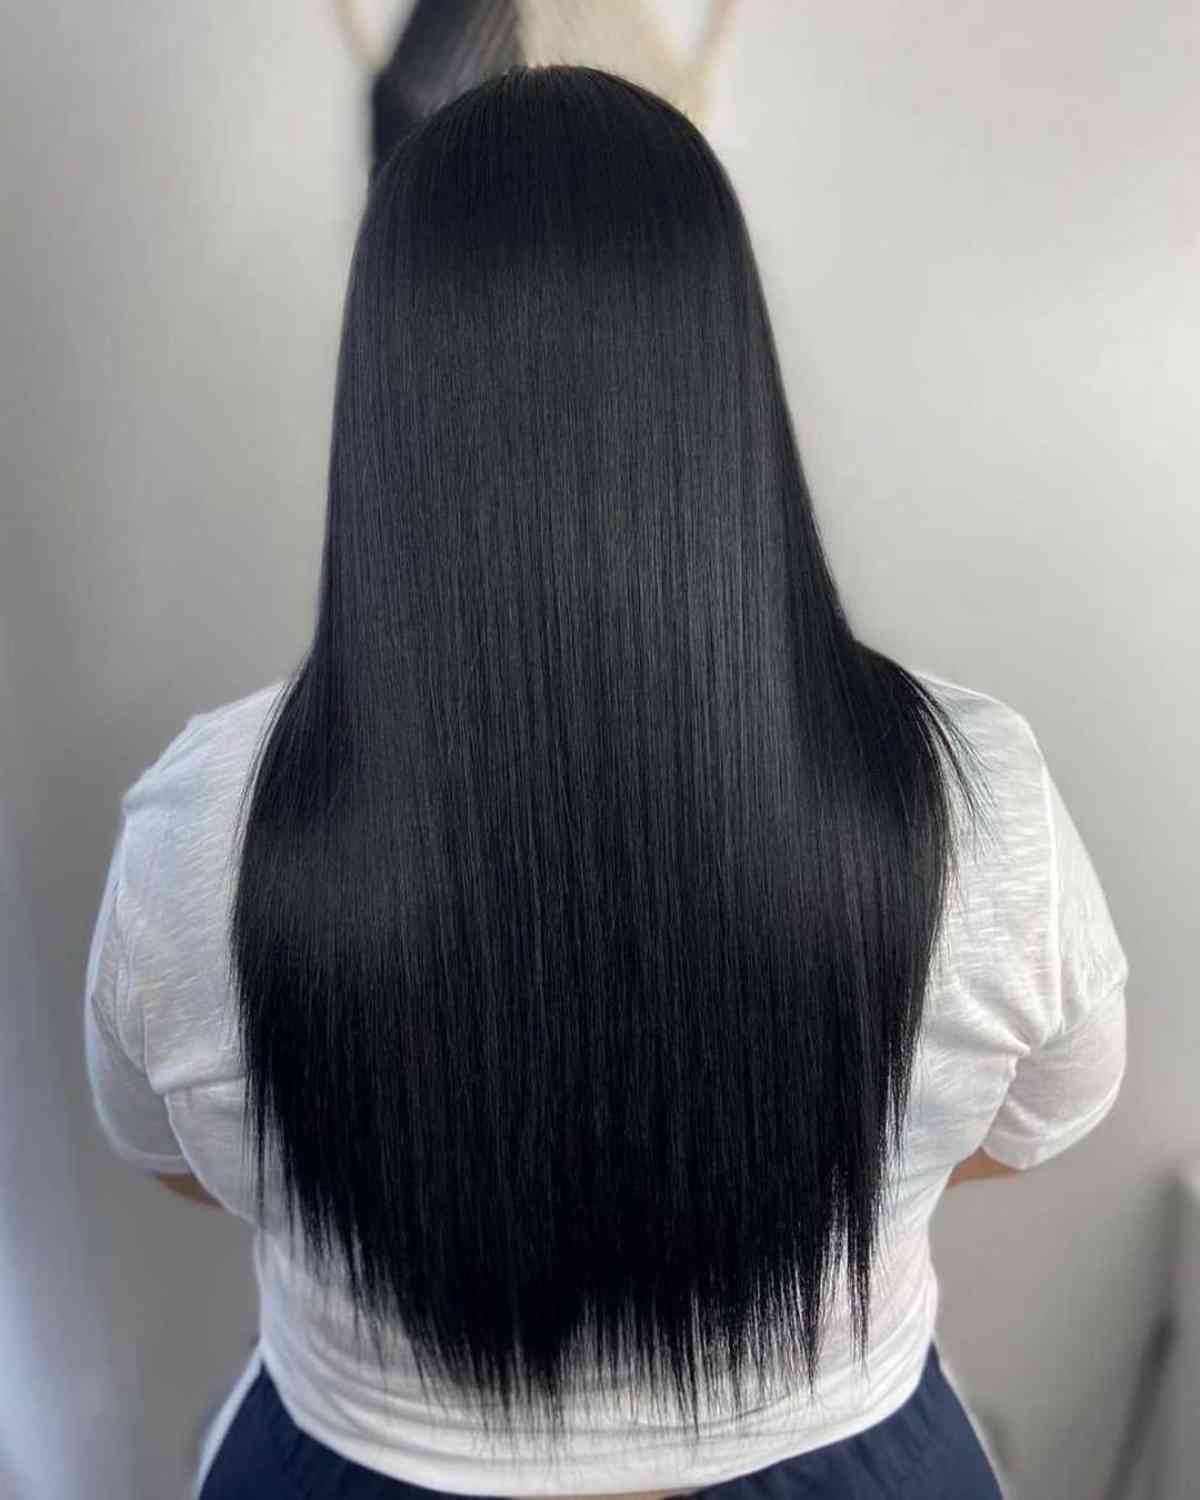 Straight long black hair with textured ends